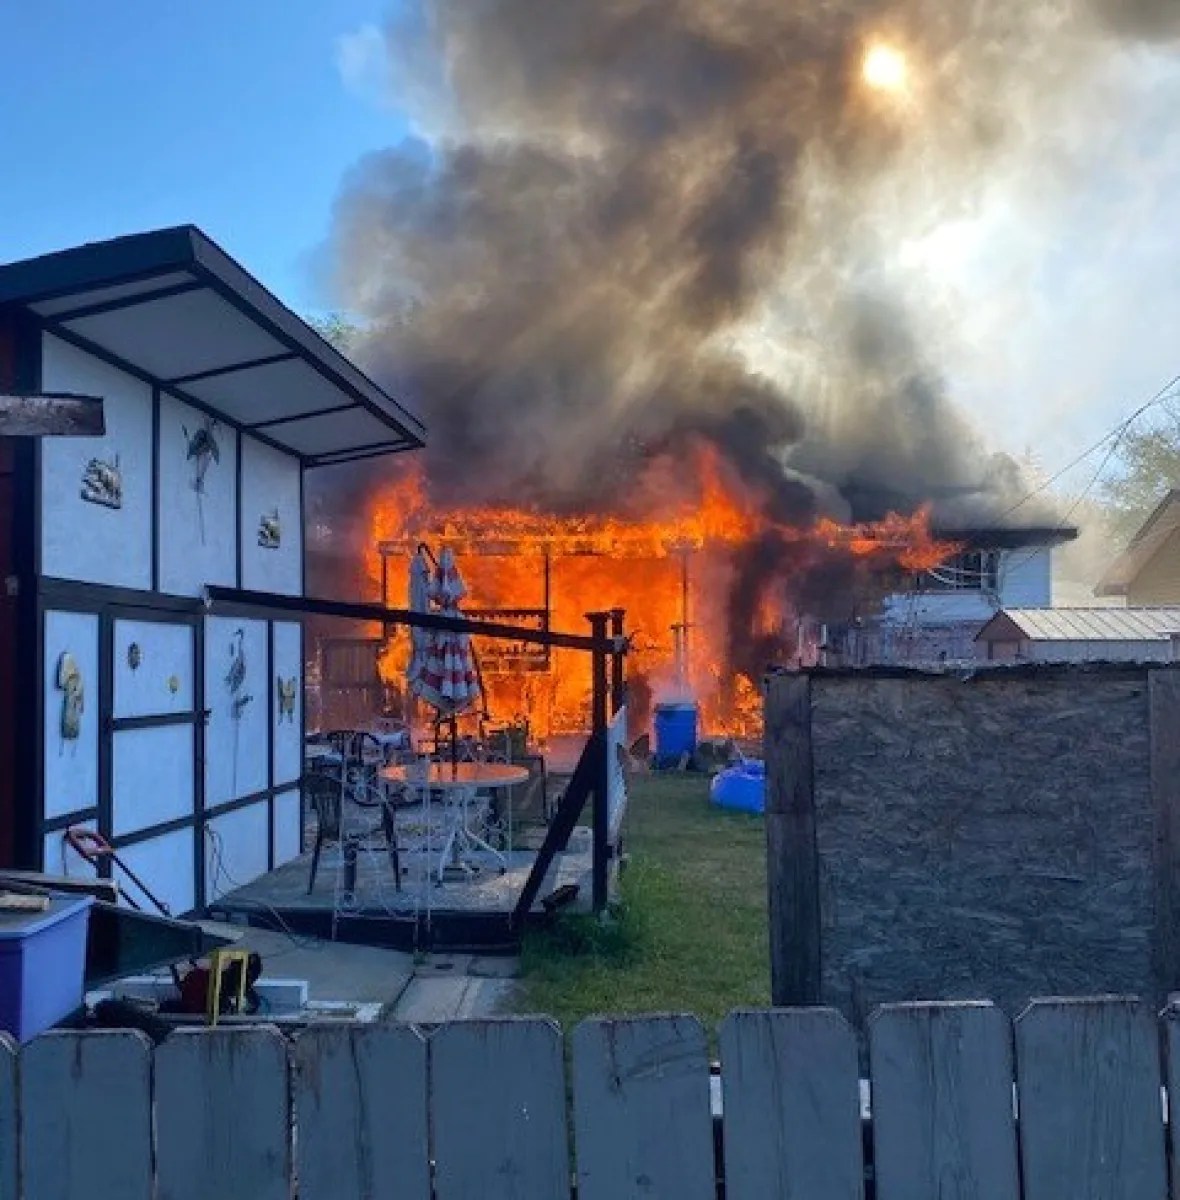 On Monday morning, Saskatoon fire crews arrived at a home engulfed by flame in the 1700 Block of Avenue D North, with heavy black smoke coming from the roof, according to the Saskatoon Fire Department.